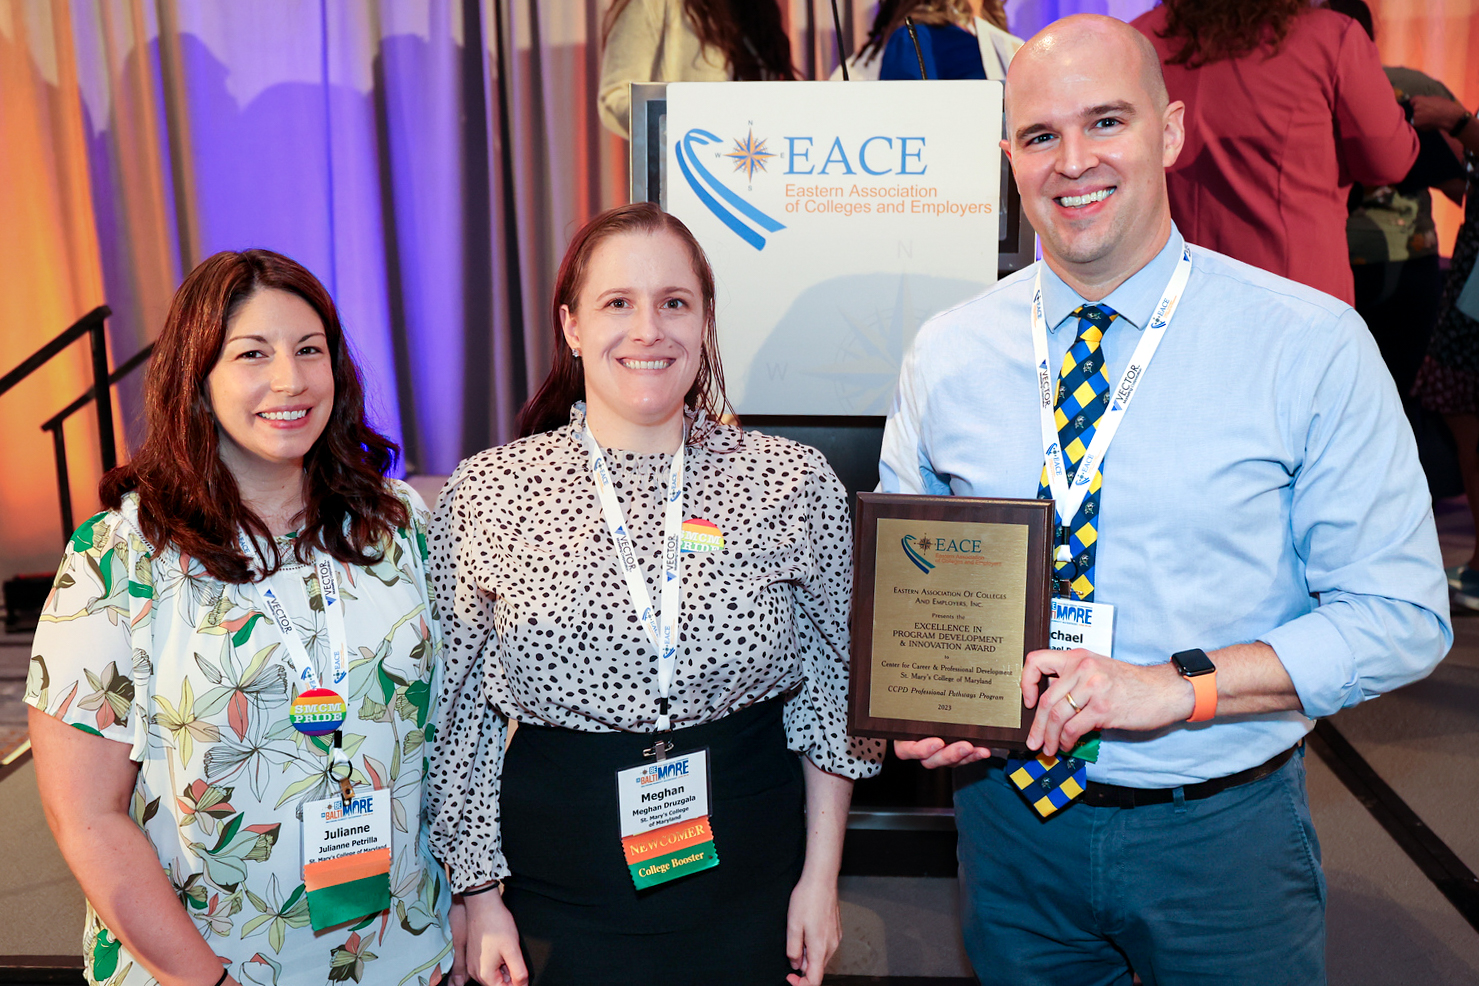 Staff receiving an award at the annual conference of the Eastern Association of Colleges and Employers